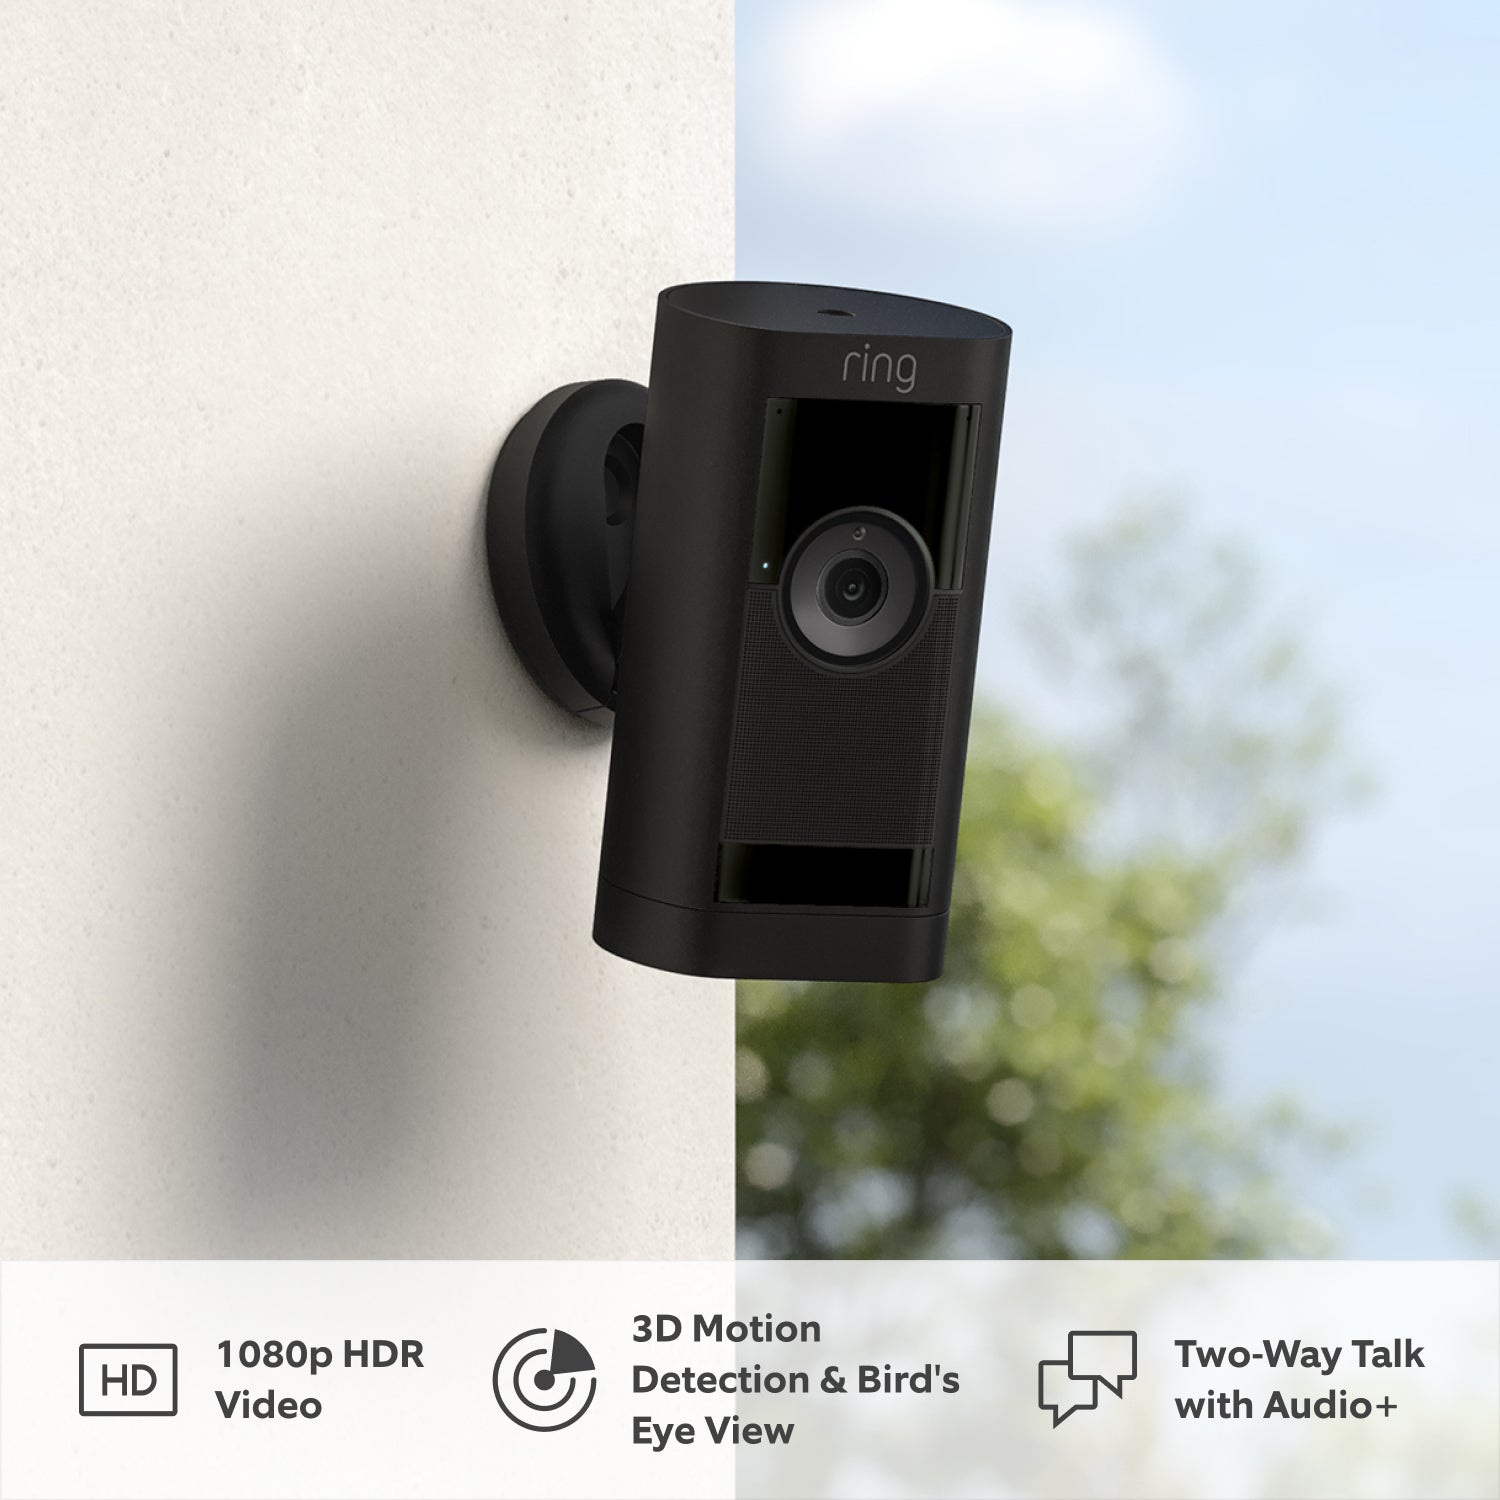 Introducing Ring Stick Up Cam Pro Battery Two-Way Talk with Audio+, 3D  Motion Detection with Bird's Eye Zones, 1080p HDR Video & Color Night Vision